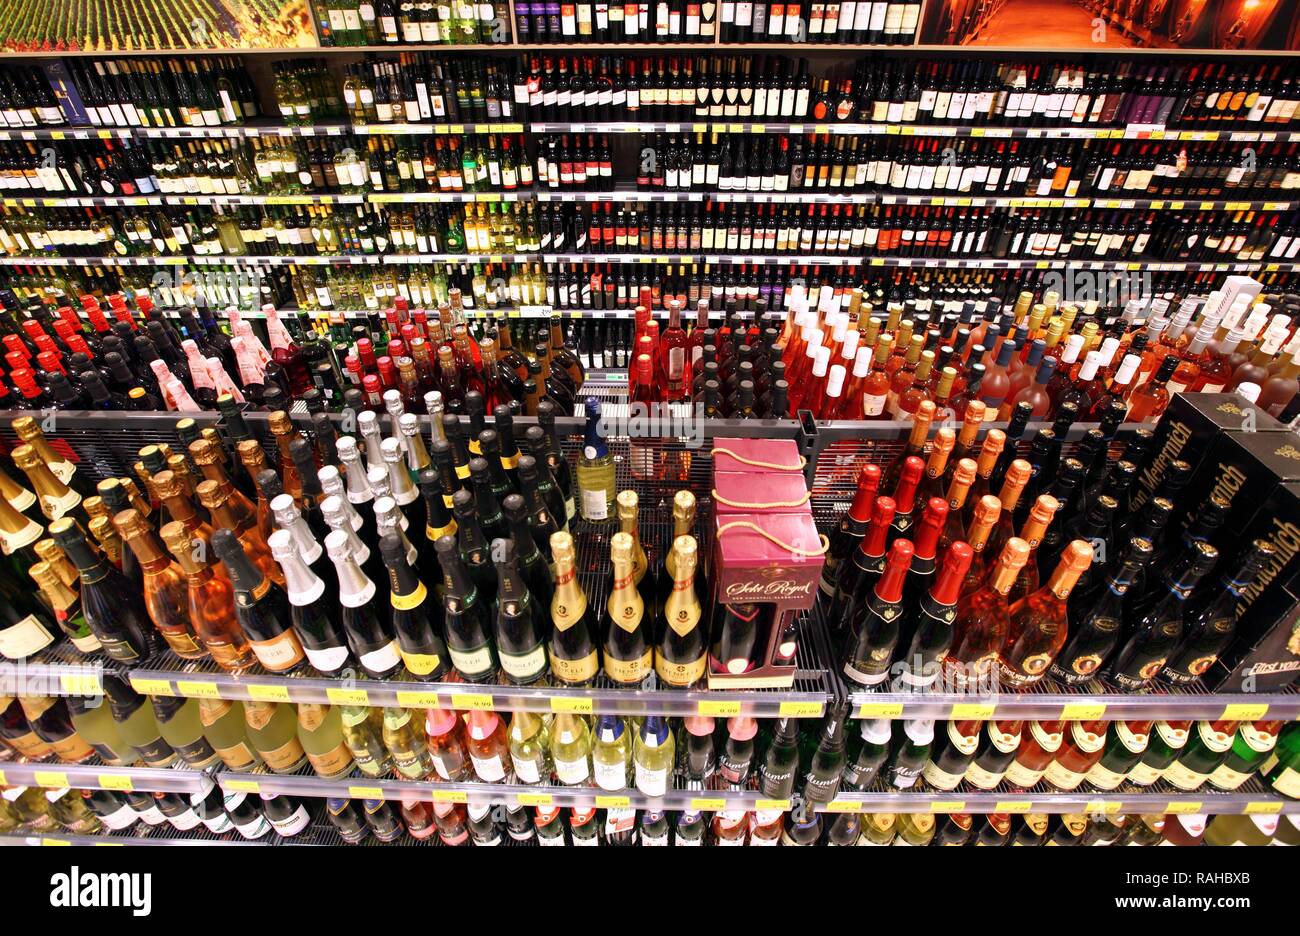 Beverage section, alcohol, spirits, self-service, food department, supermarket Stock Photo